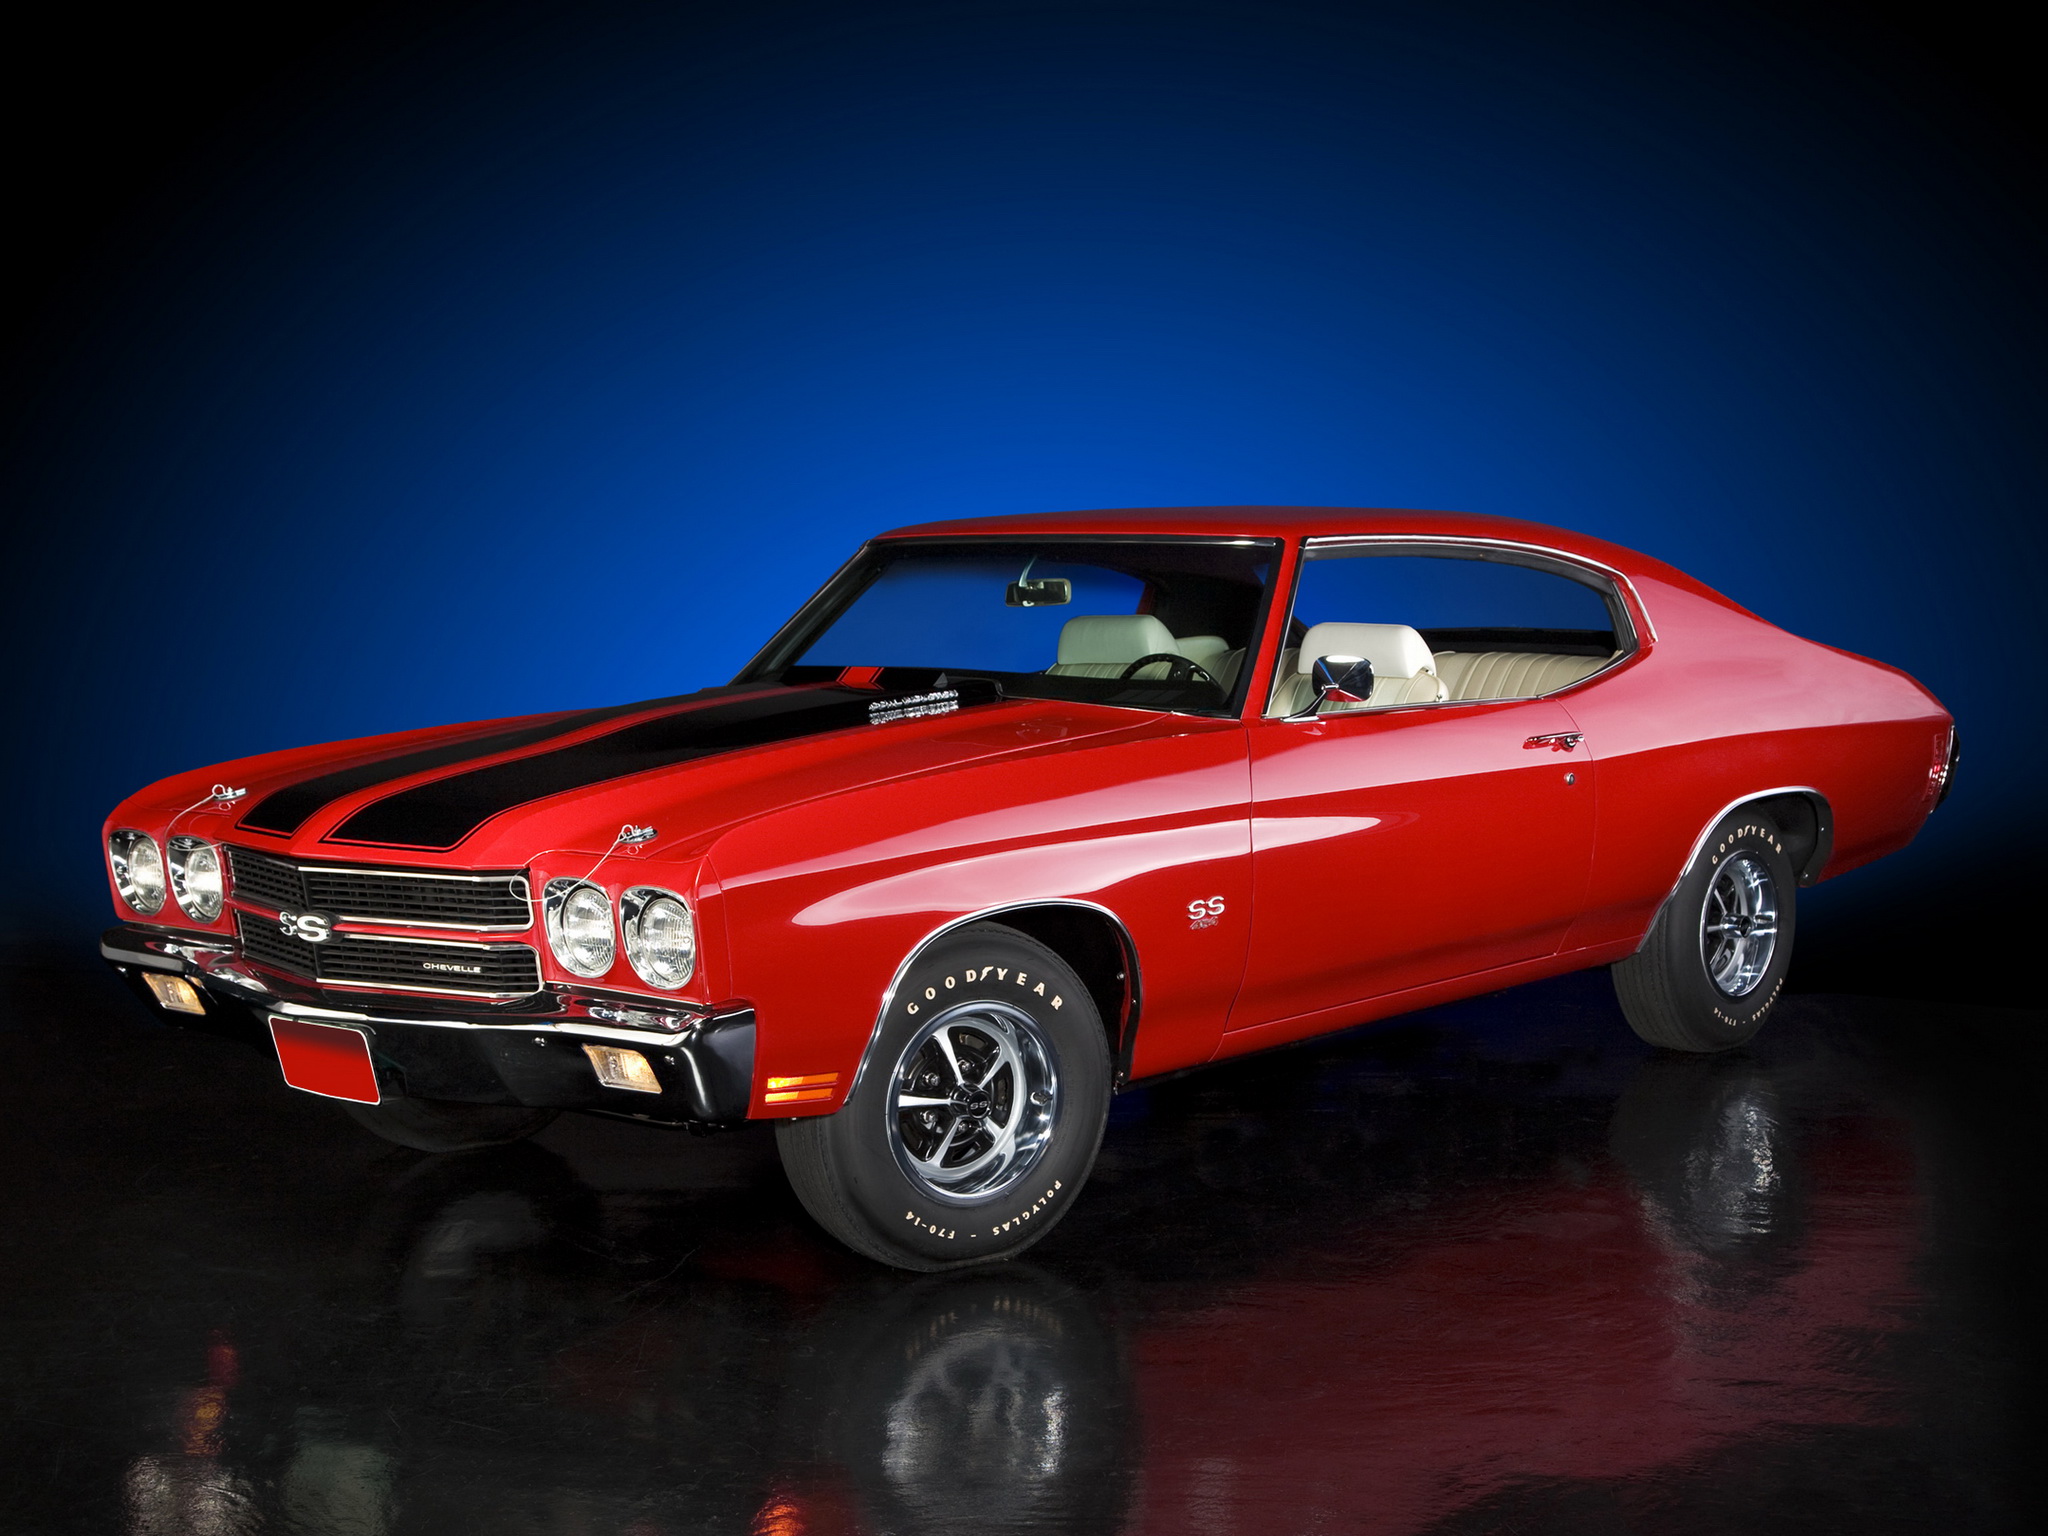 1970, Chevrolet, Chevelle, Ss, 454, Ls6, Hardtop, Coupe, Muscle, Classic, S s, Gs Wallpaper